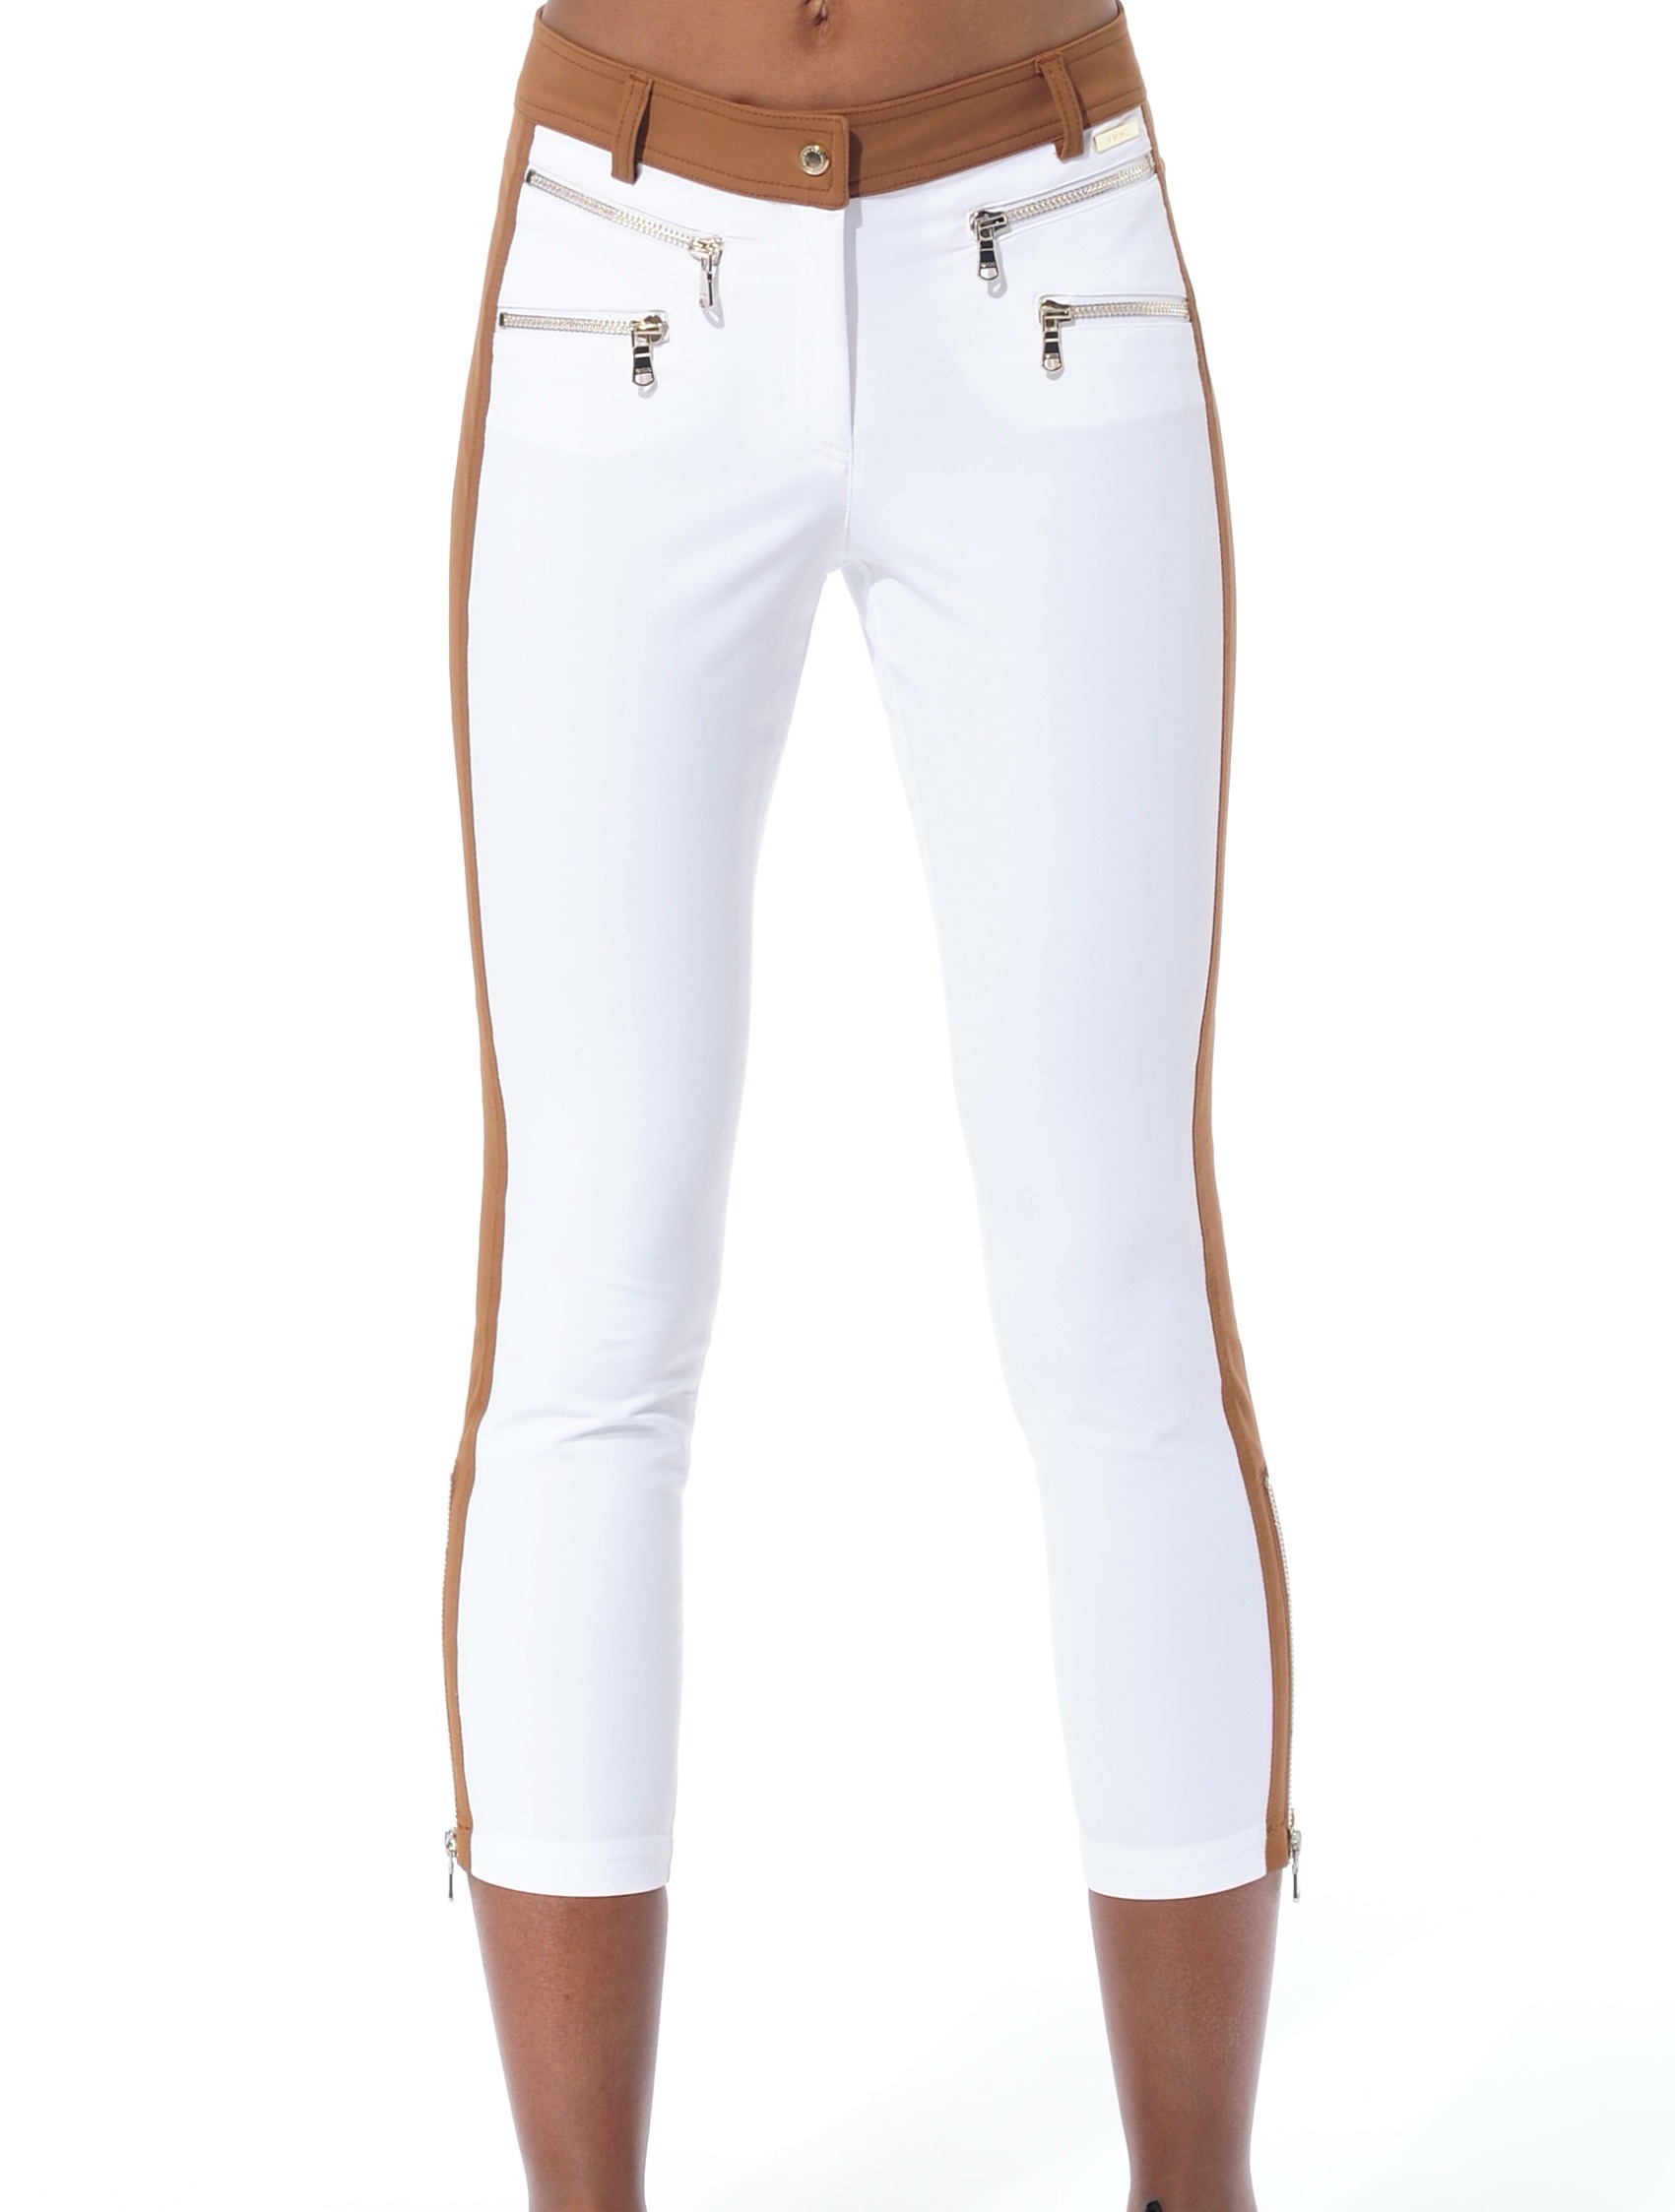 4way stretch double zip cropped pants white/ocre 